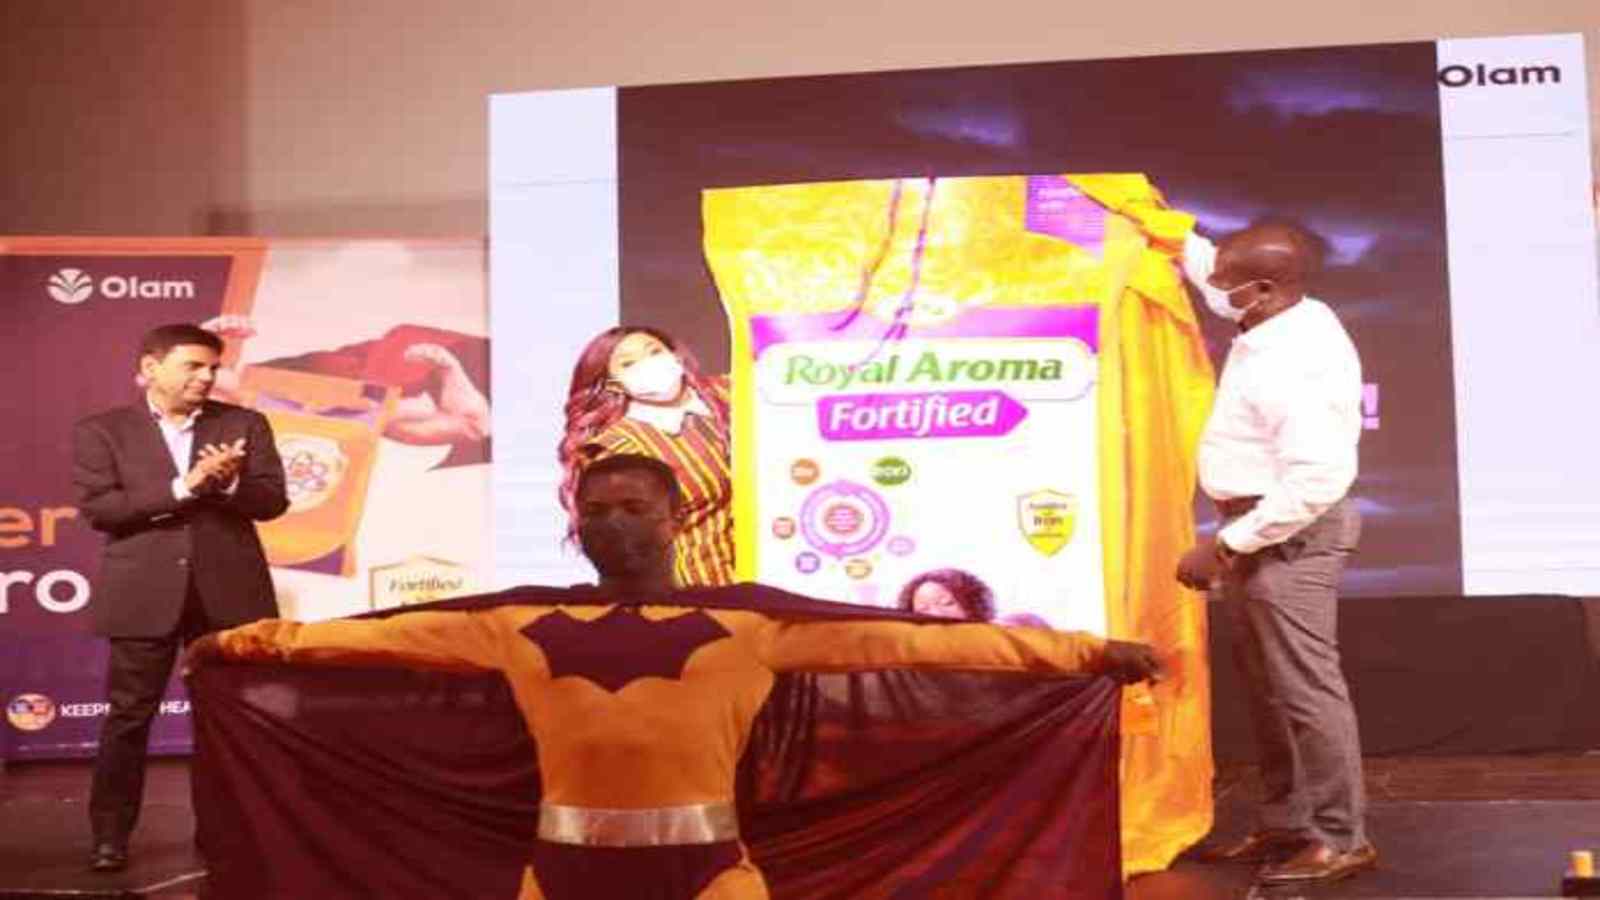 Olam introduces Ghana’s first fortified rice brand dubbed Royal Aroma Fortified Rice